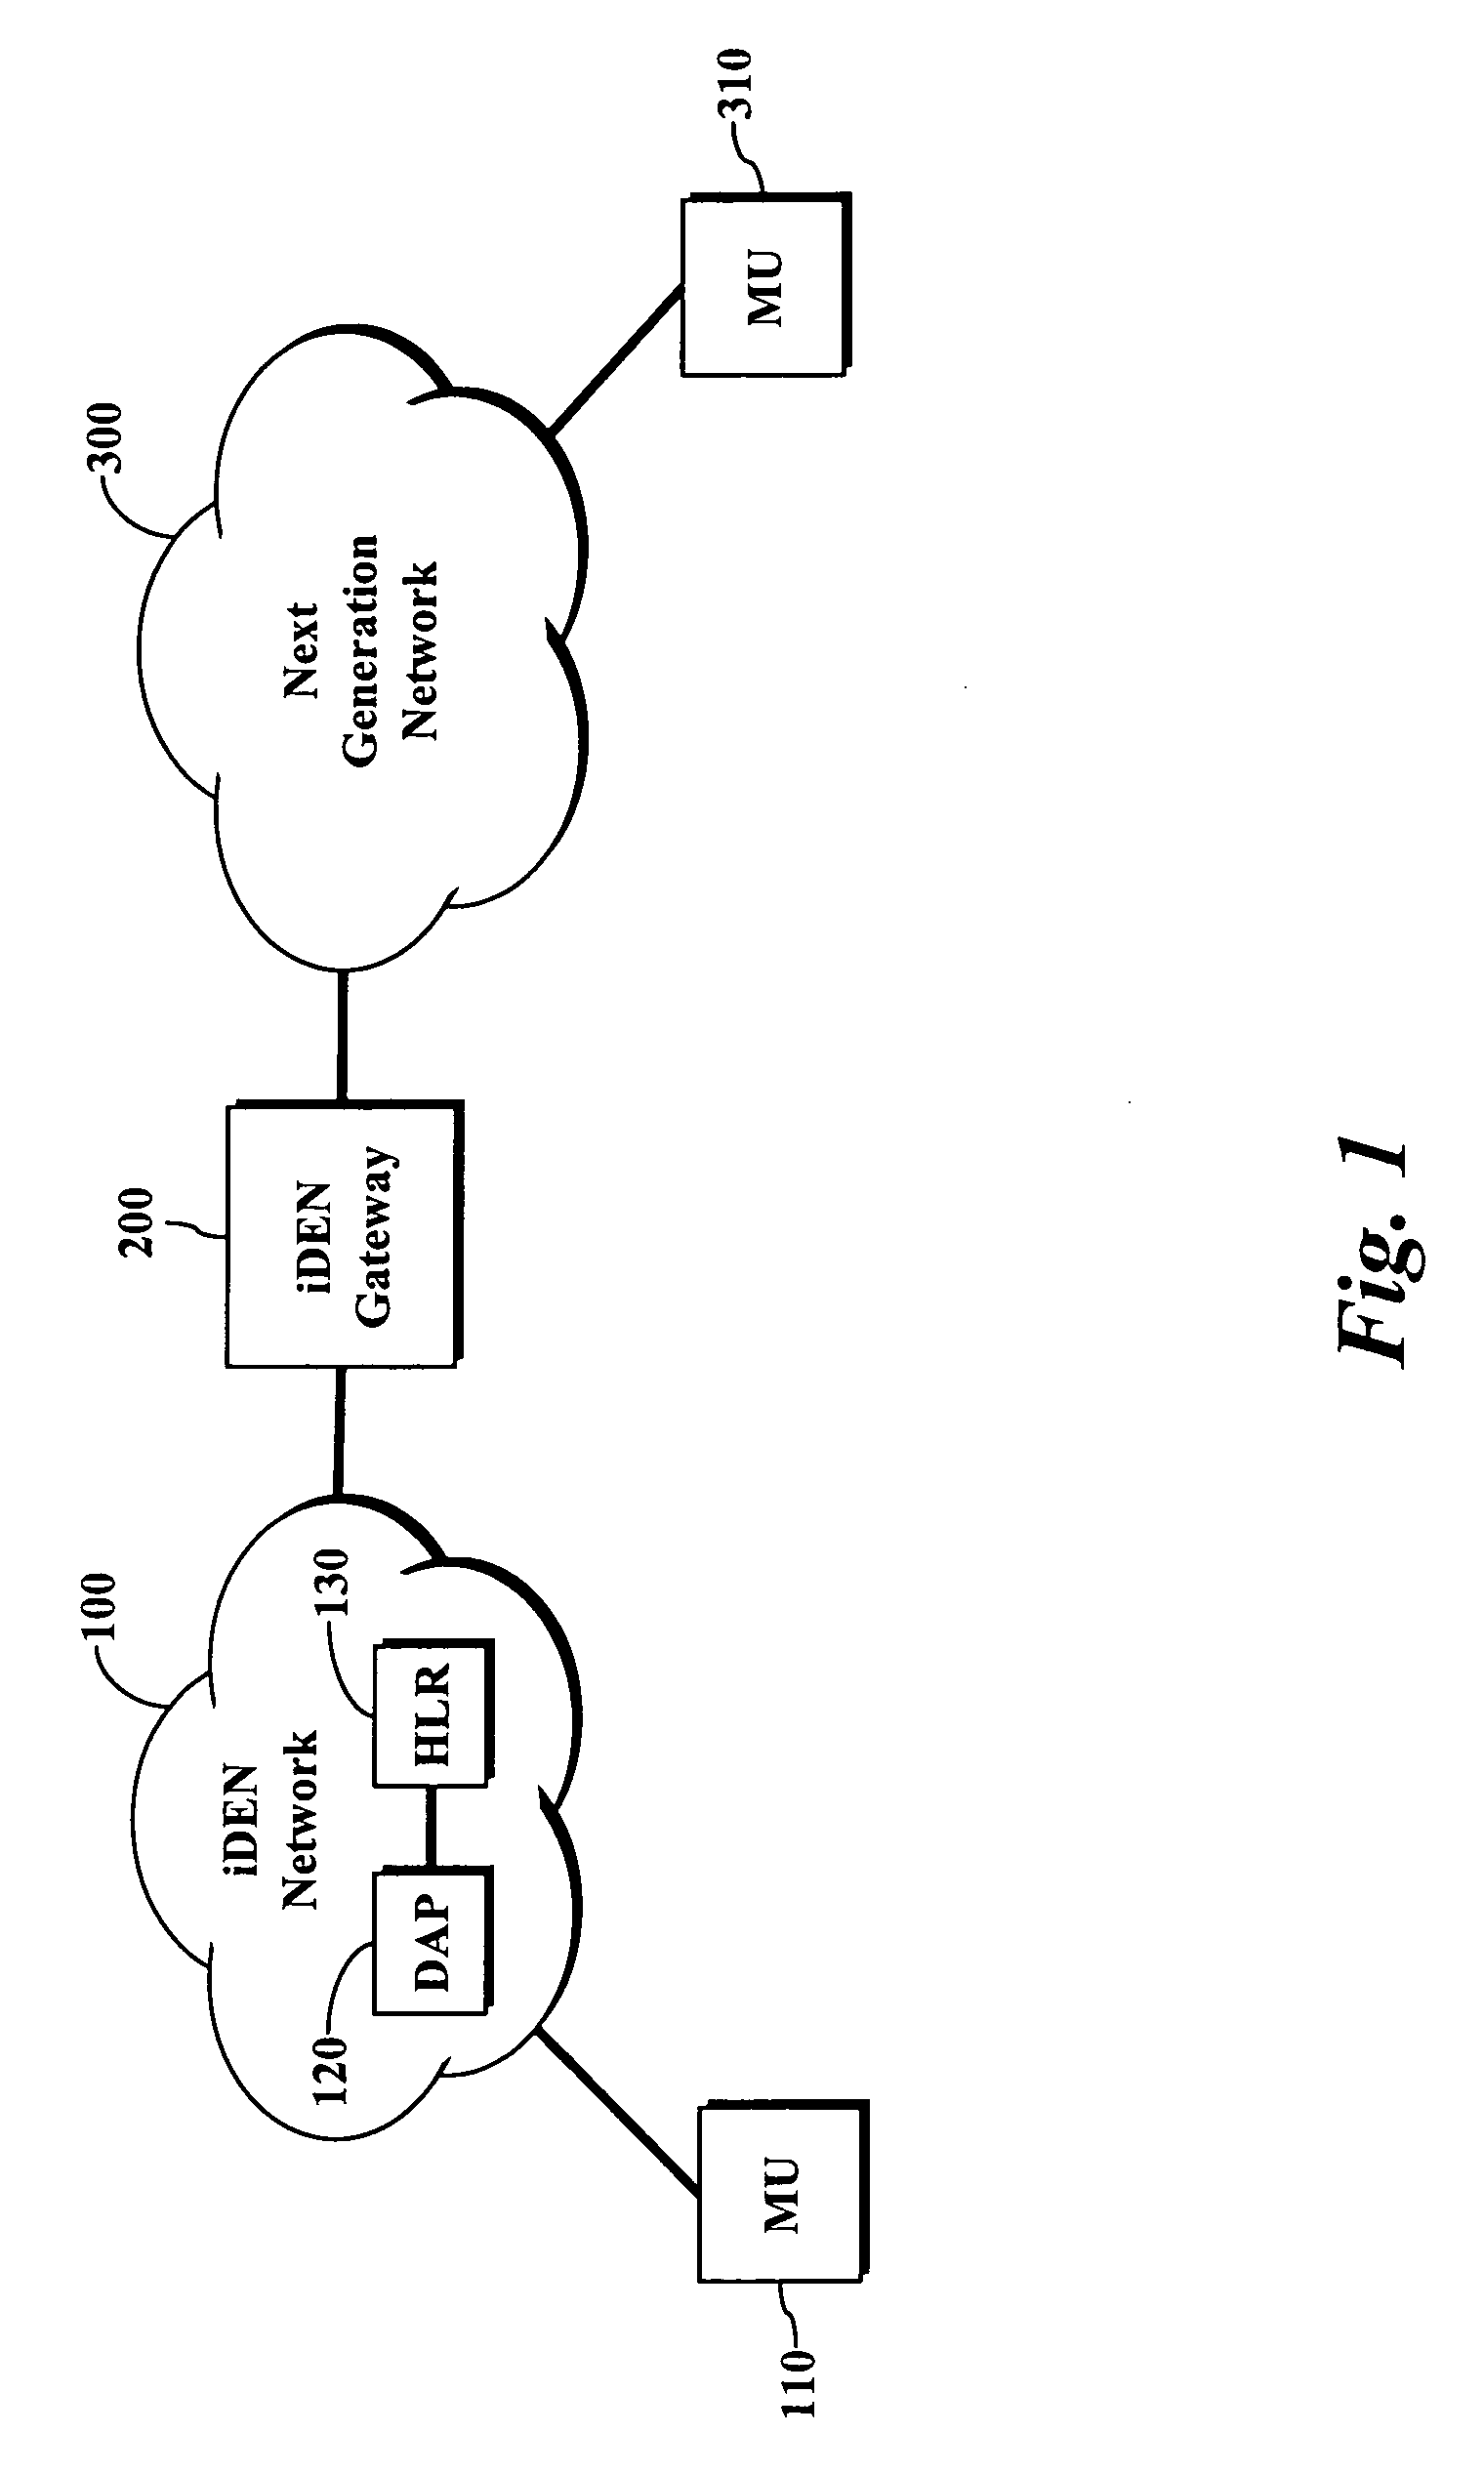 Integrated digital enhanced network migrated subscriber mapping